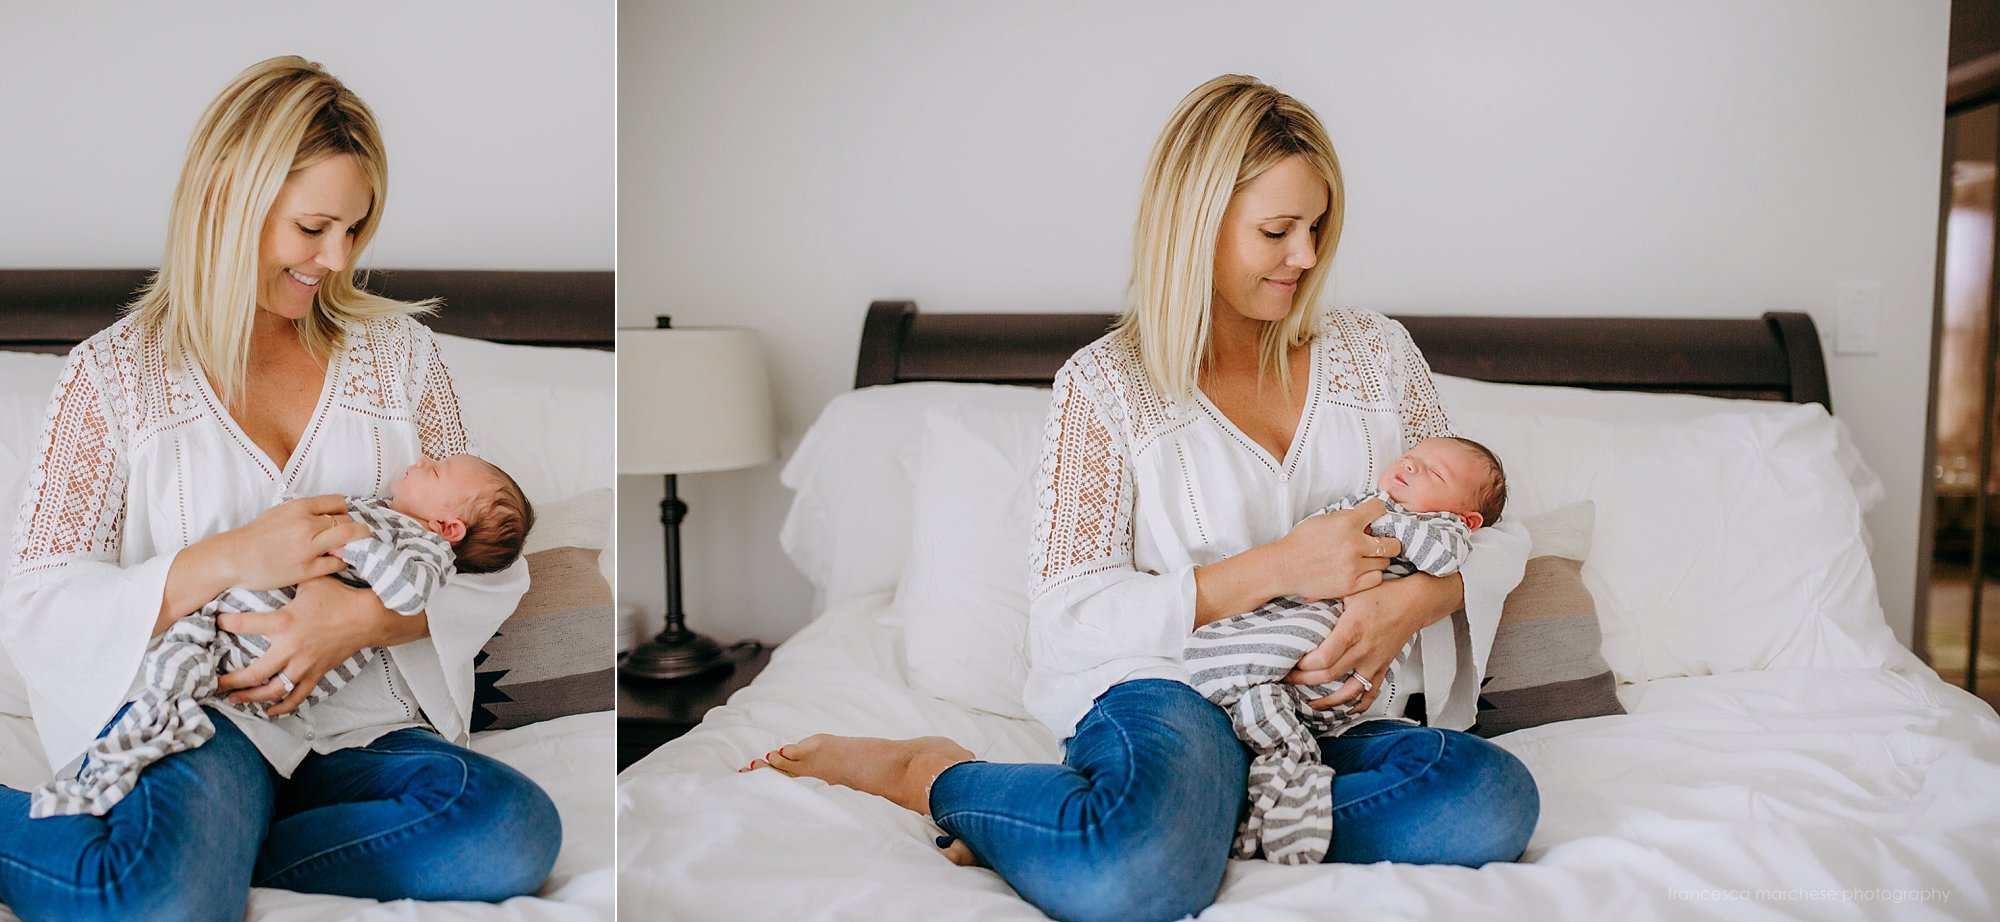 Newborn boy in home photography session - Francesca Marchese Photography Orange County, Long Beach, South bay Los Angeles lifestyle newborn photographer